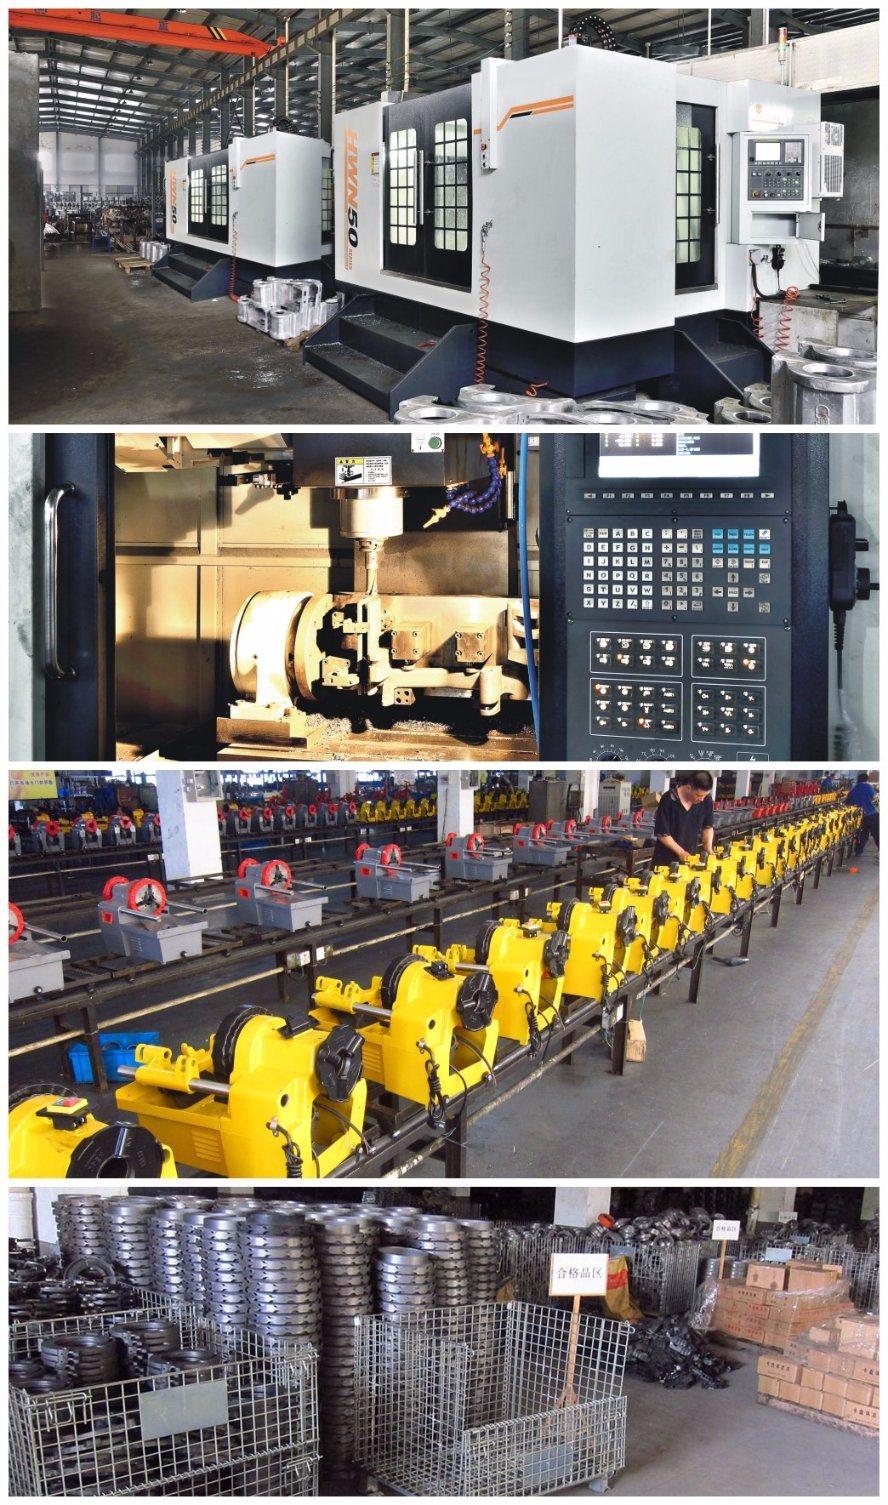 High Efficiency Ce Approved Electric Steel Pipe Threading Machine (SQ100D)